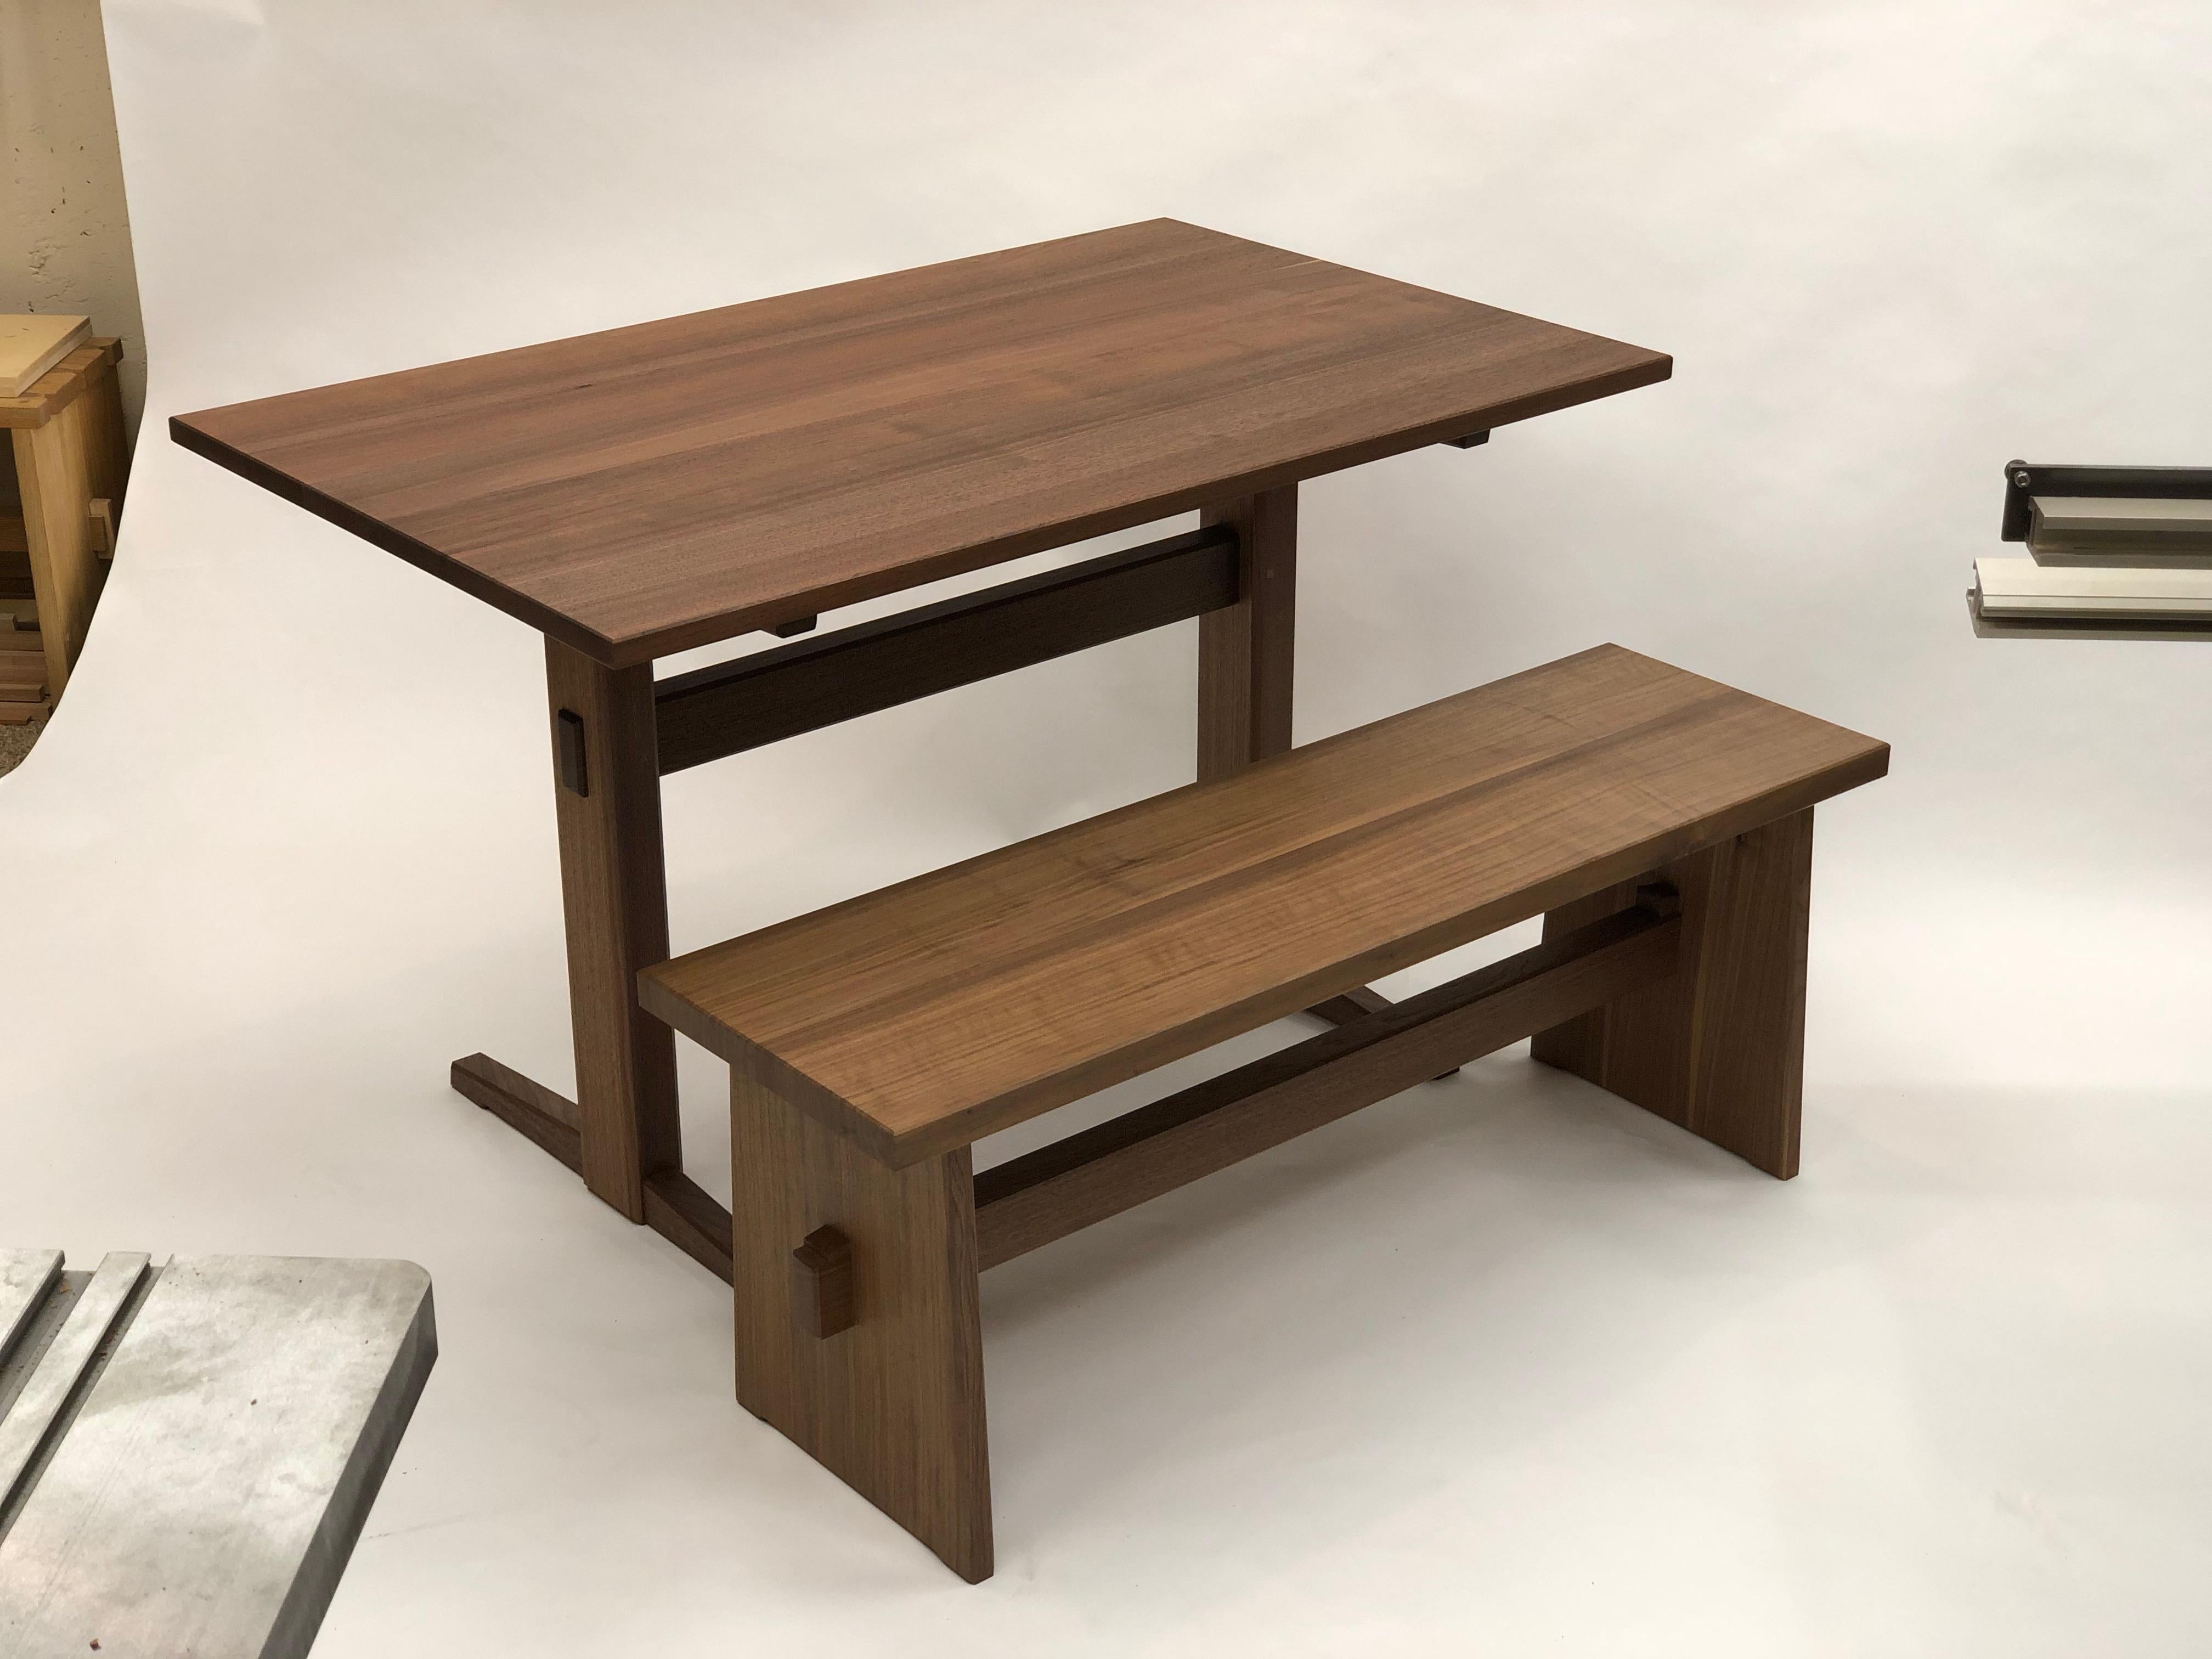 Trestle Base Bench Seat in Quarter Sawn Walnut by Brian Holcombe In New Condition For Sale In Princeton, NJ